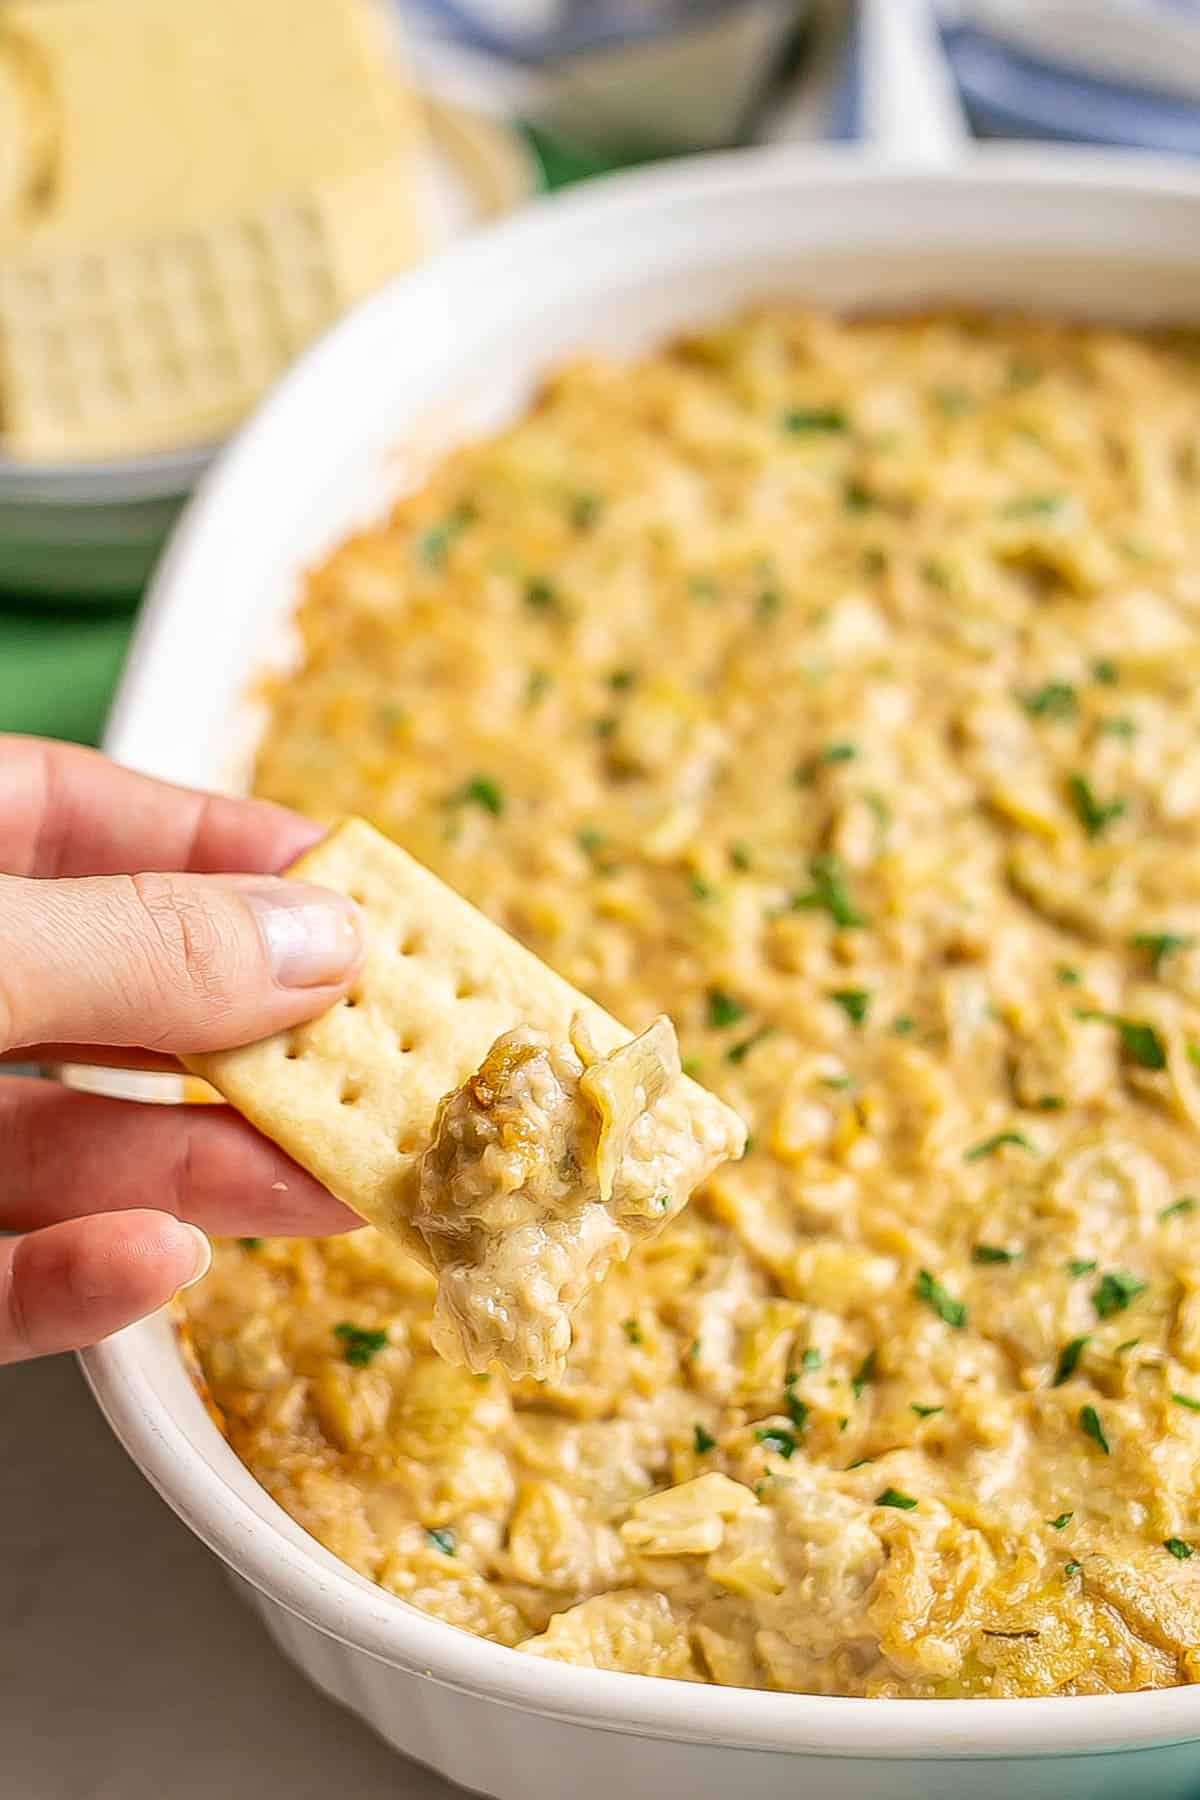 A hand holding up a cracker with a creamy artichoke dip.